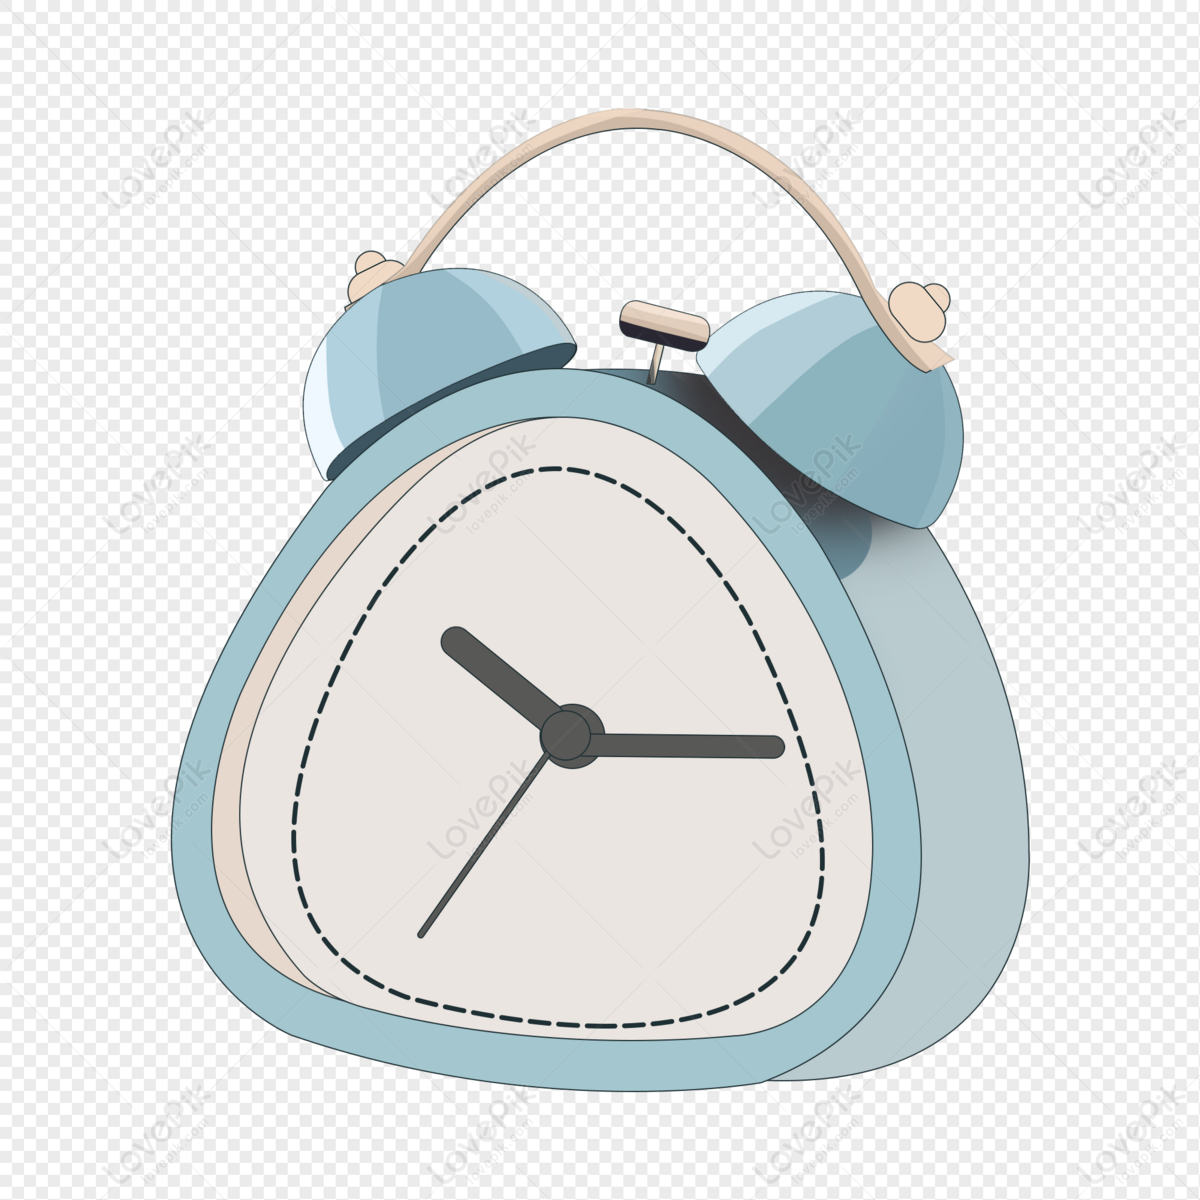 Blue Cartoon Alarm Clock PNG Image And Clipart Image For Free Download -  Lovepik | 401552408